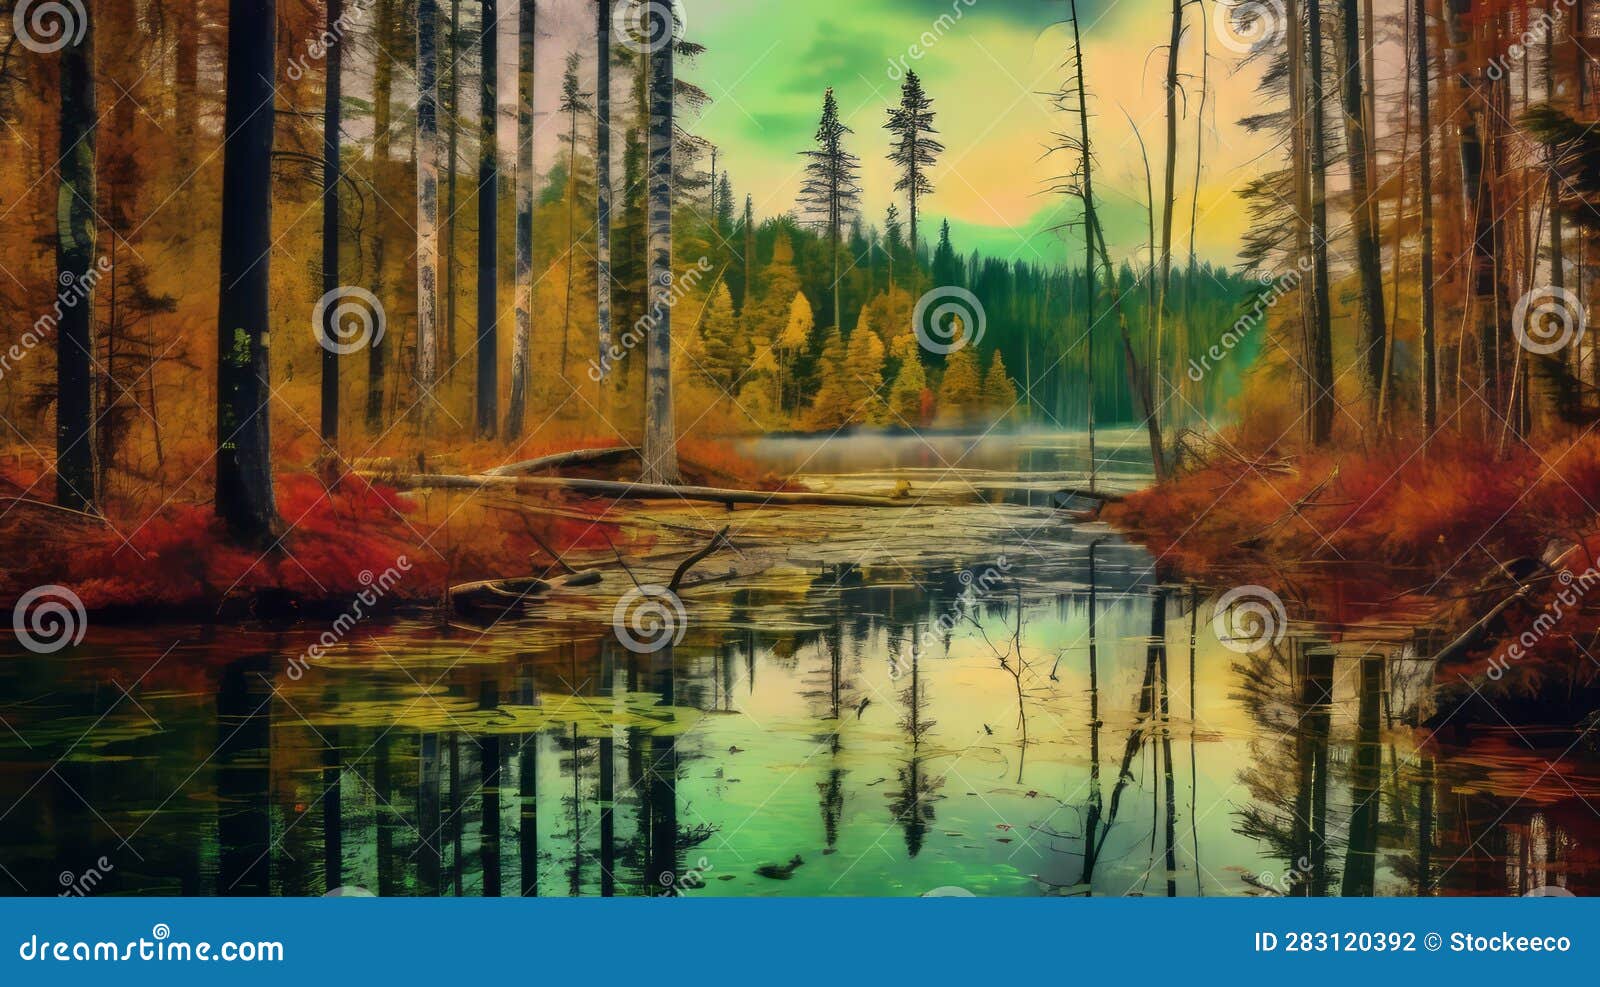 Autumn Landscape Featuring Colorful Trees Reflecting in a Lake in